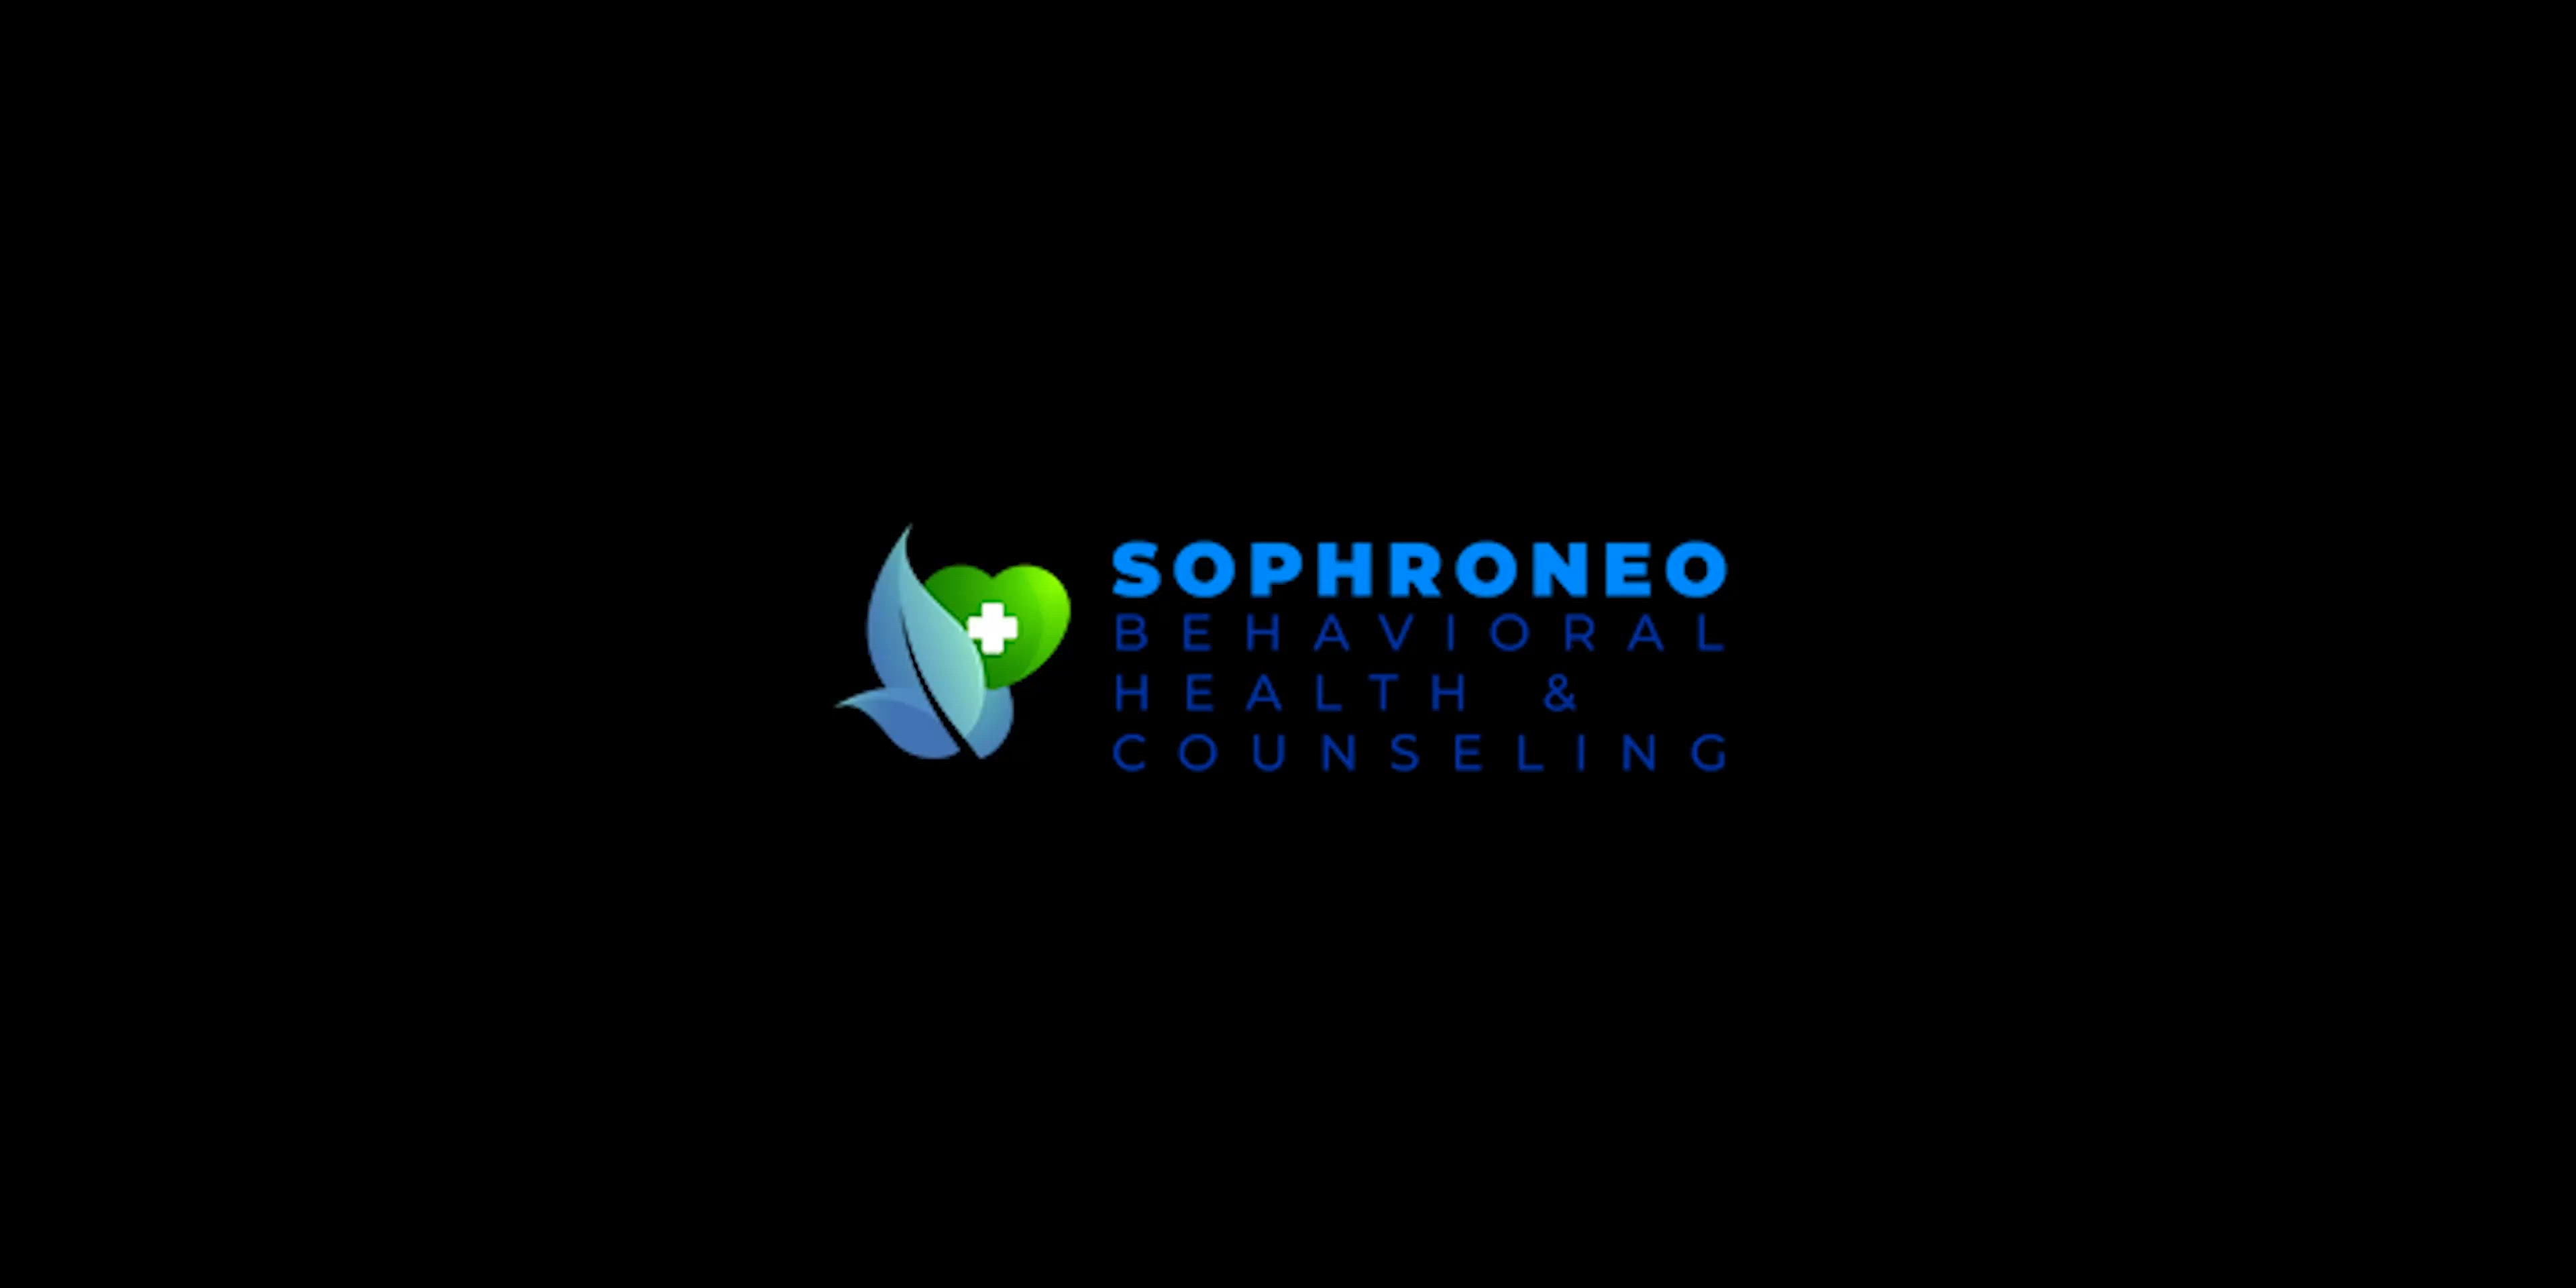 Sophroneo Behavioral Health & Counseling